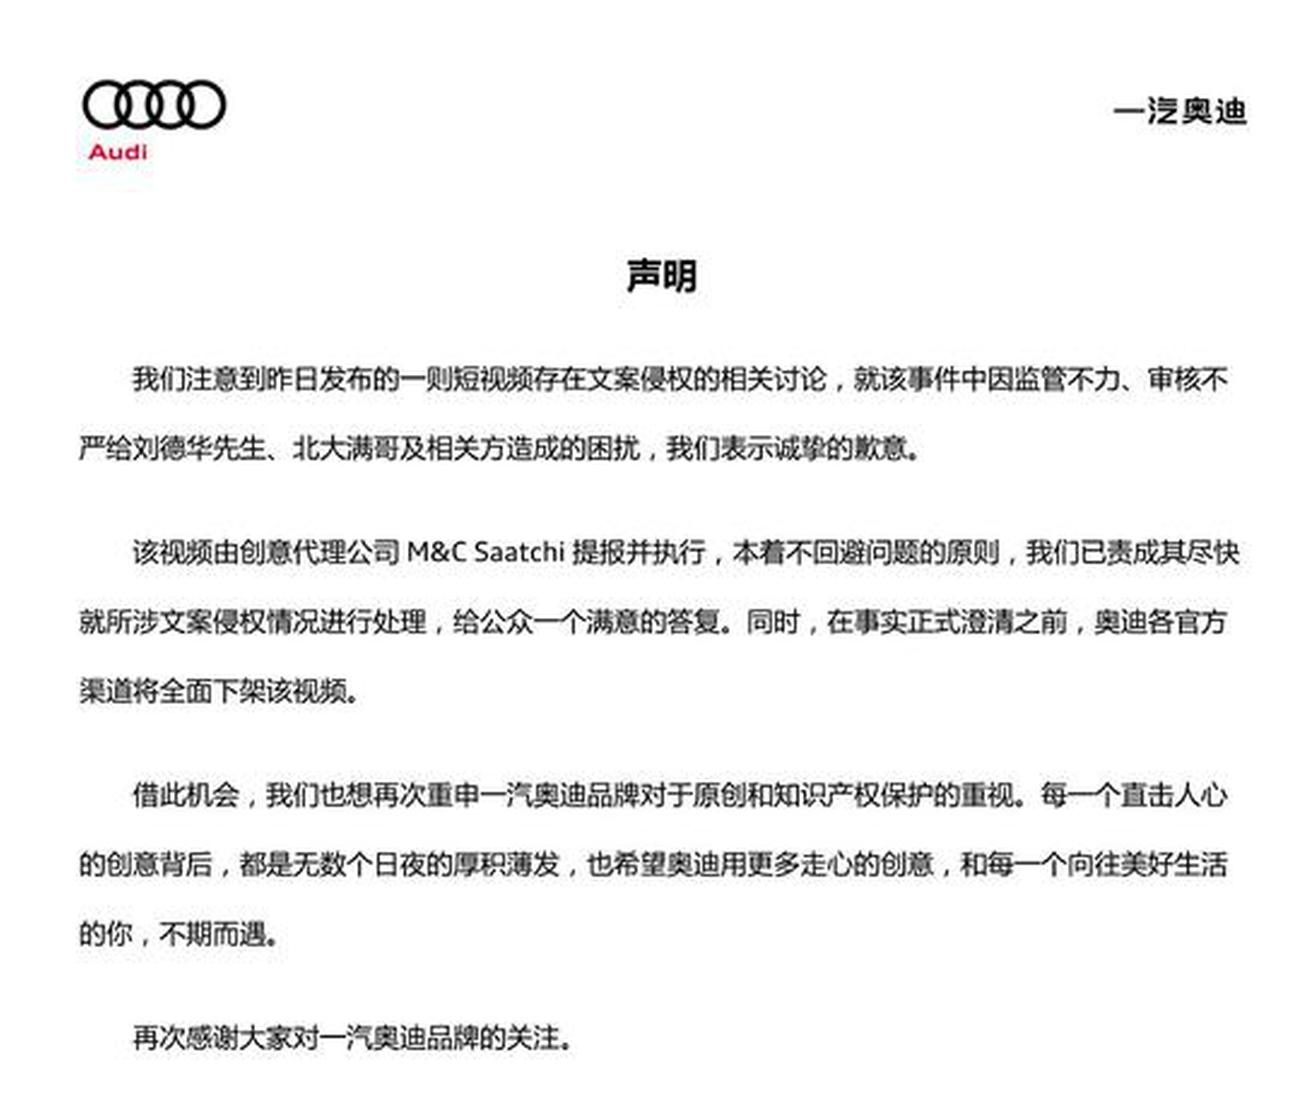 A statement released by Audi on May 22, 2022. (Photo from Audi's Weibo account)